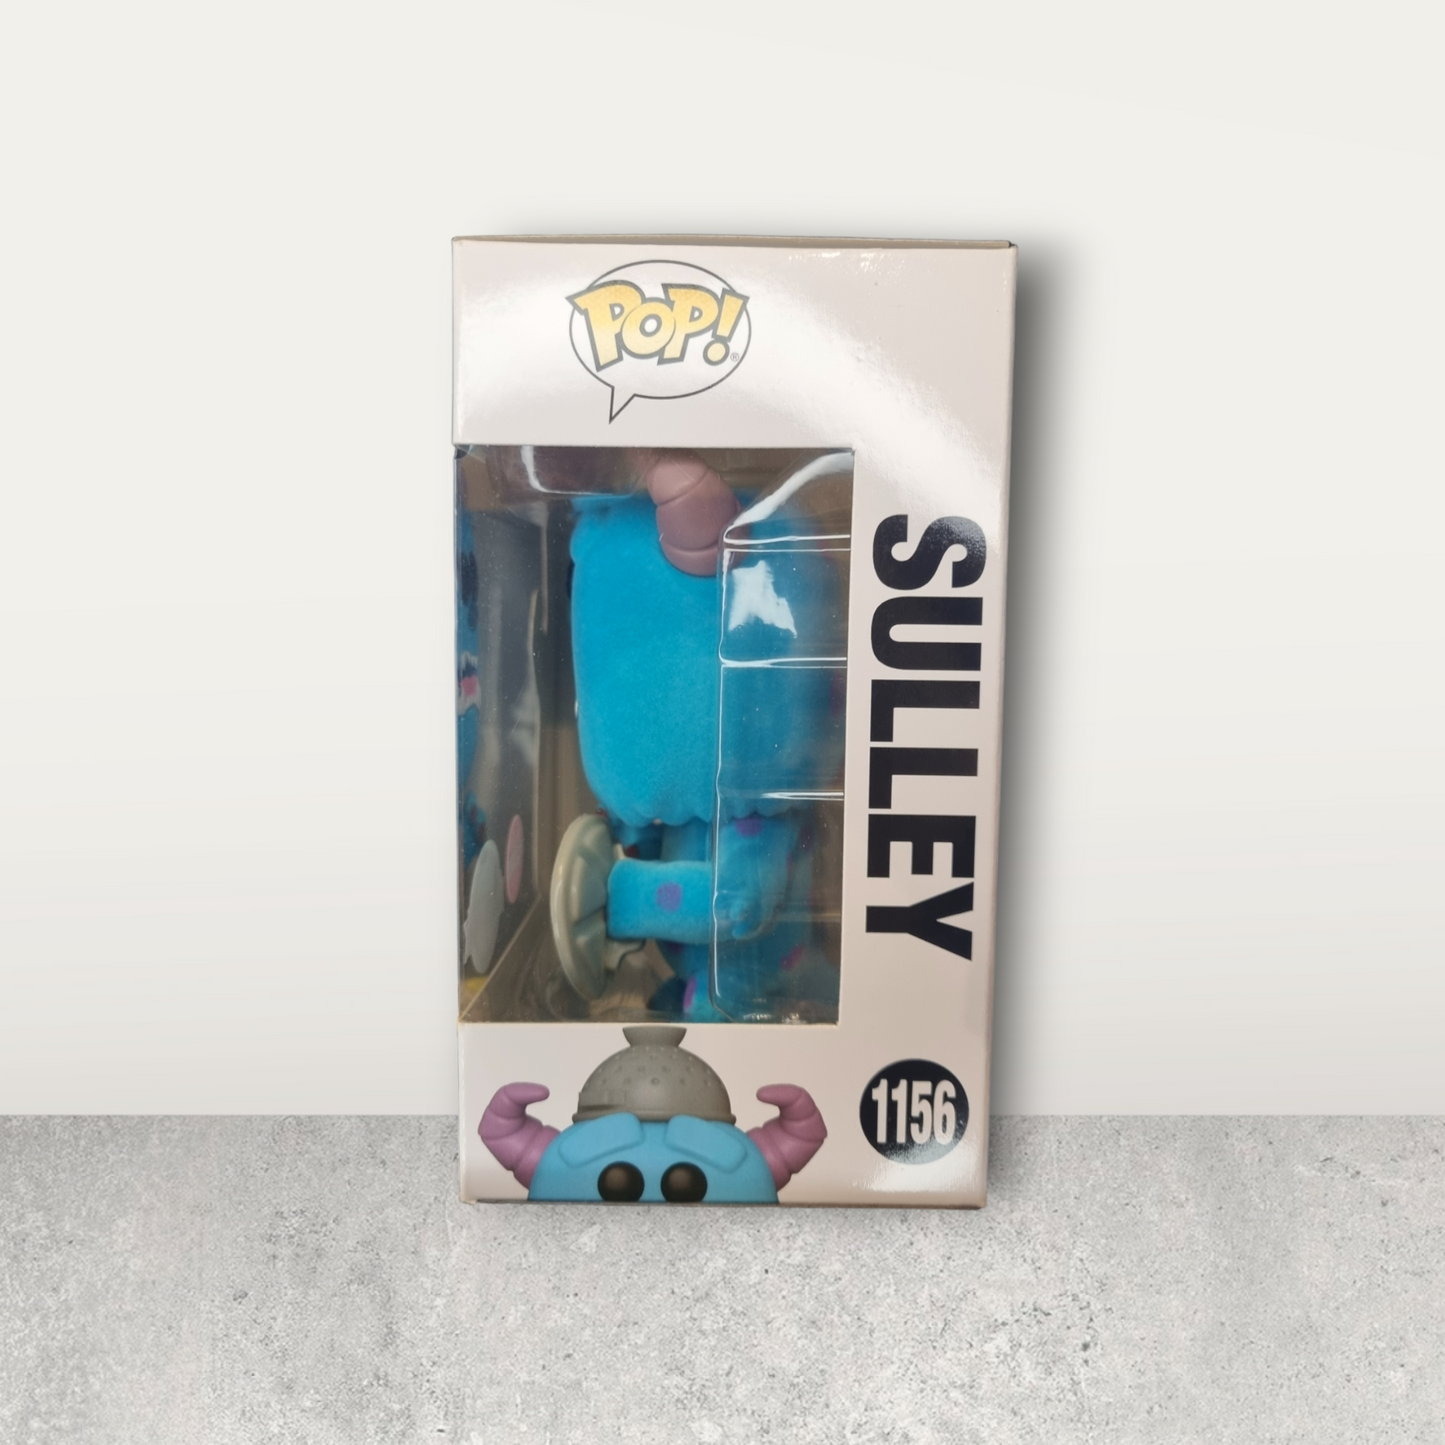 Disney - Monsters Sulley 1156